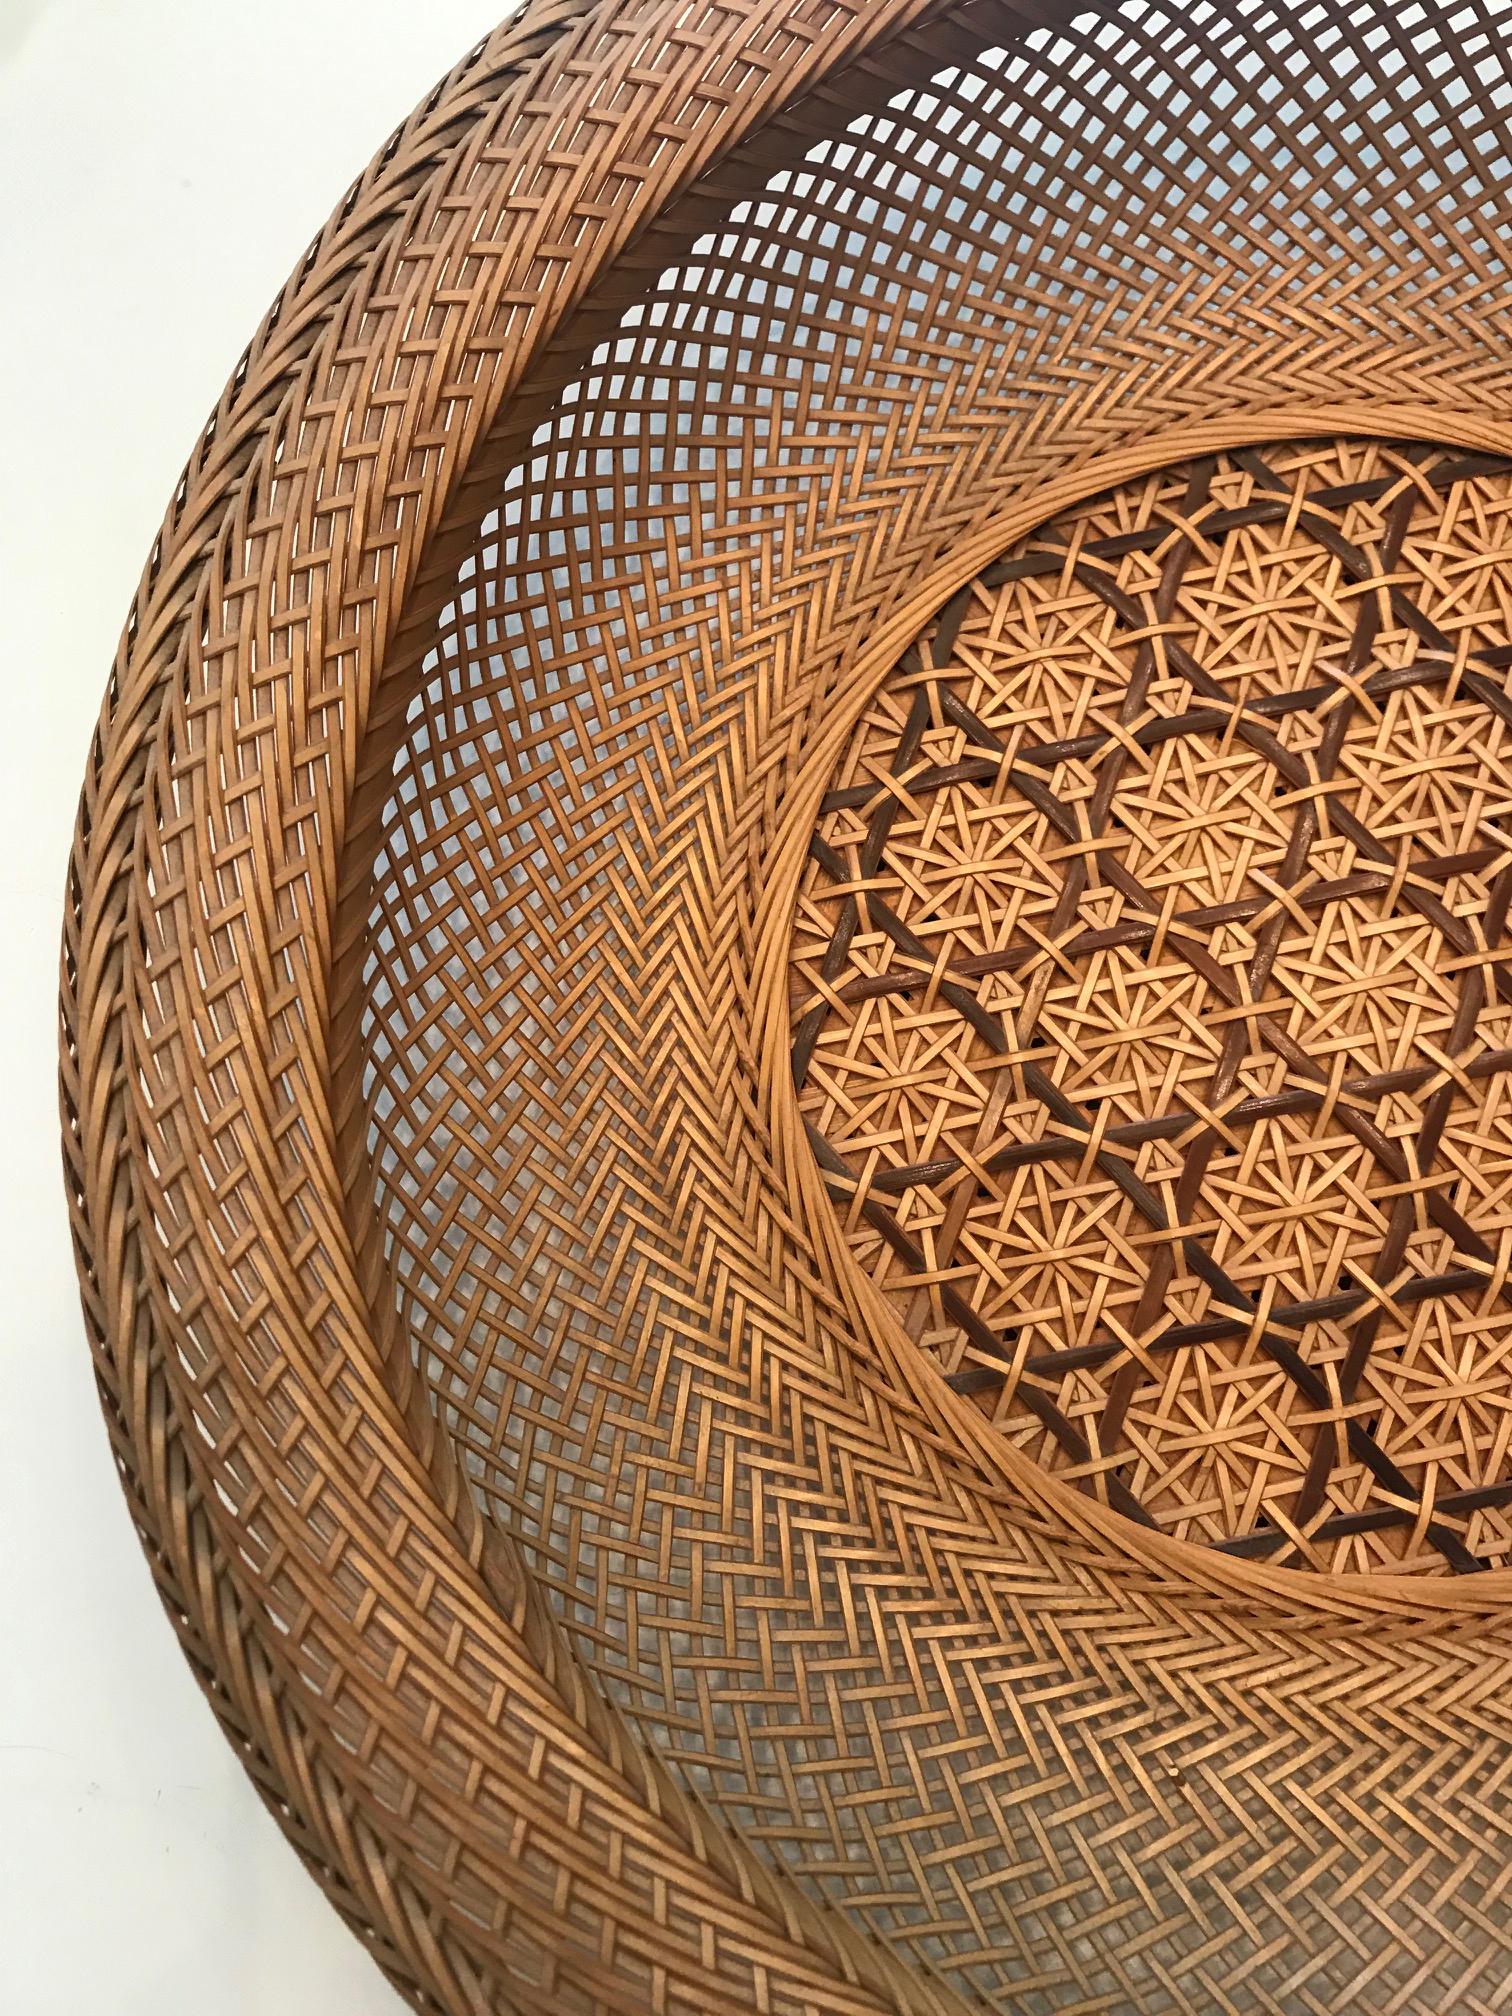 A wonderful piece of Bamboo art from Japan, circa mid-late 20th century. It was expertly woven in the form of a shallow open basket with wide rim, known in Japanese as 